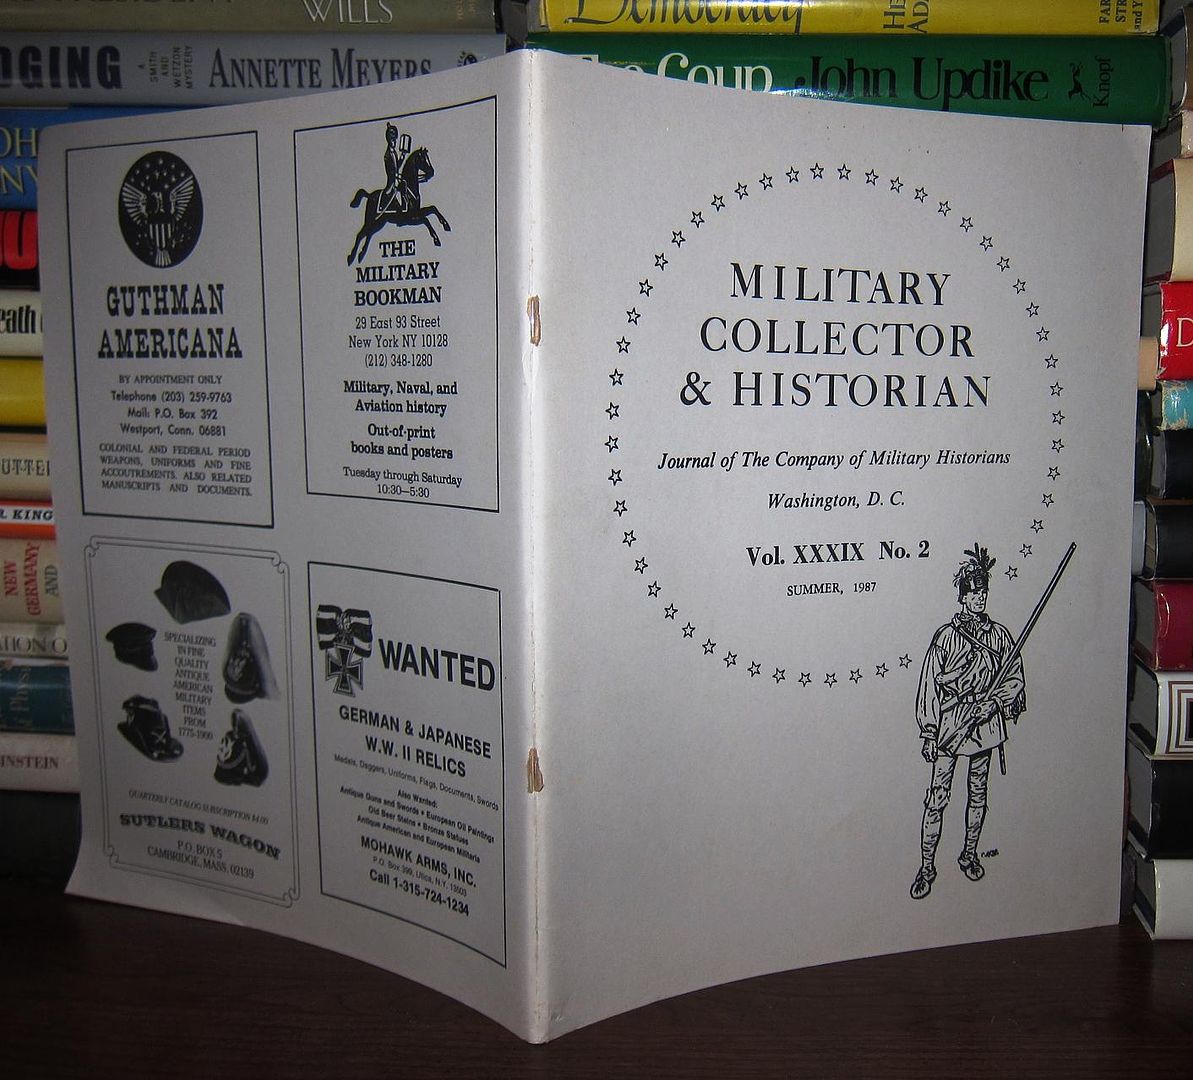 BROWNE, HOWARD - Military Collector & Historian Journal of the Company of Military Historians, Vol. XXXIX, No. 2